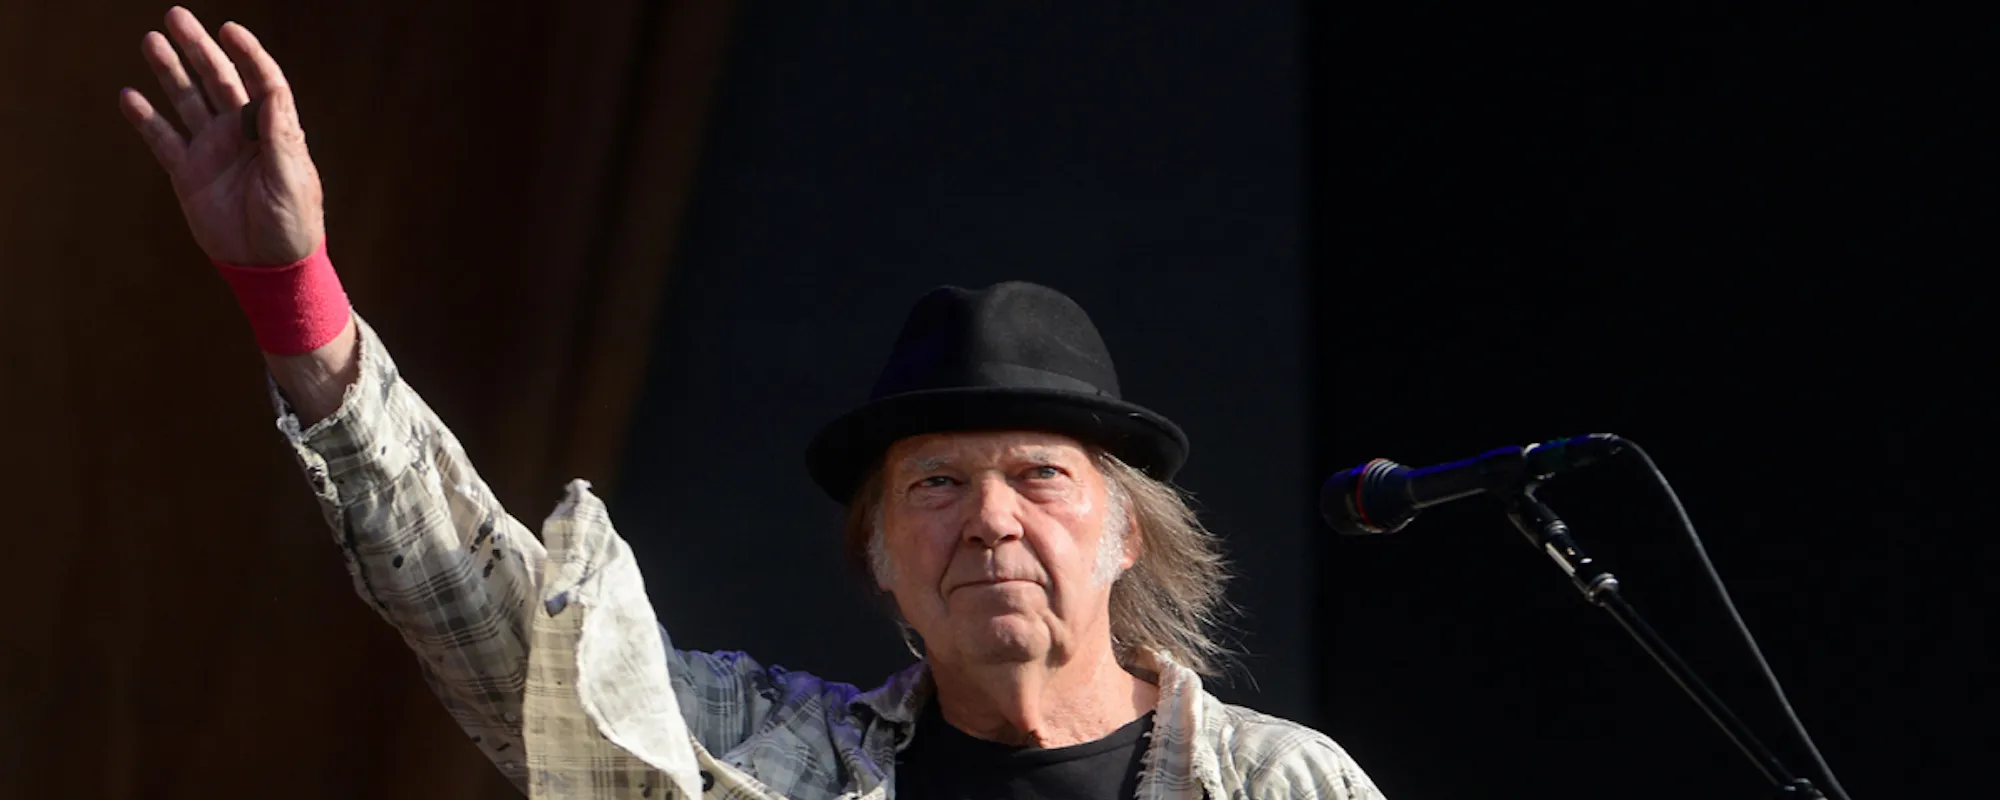 Neil Young Withdraws from Farm Aid 2021 Performance Over Pandemic Concerns